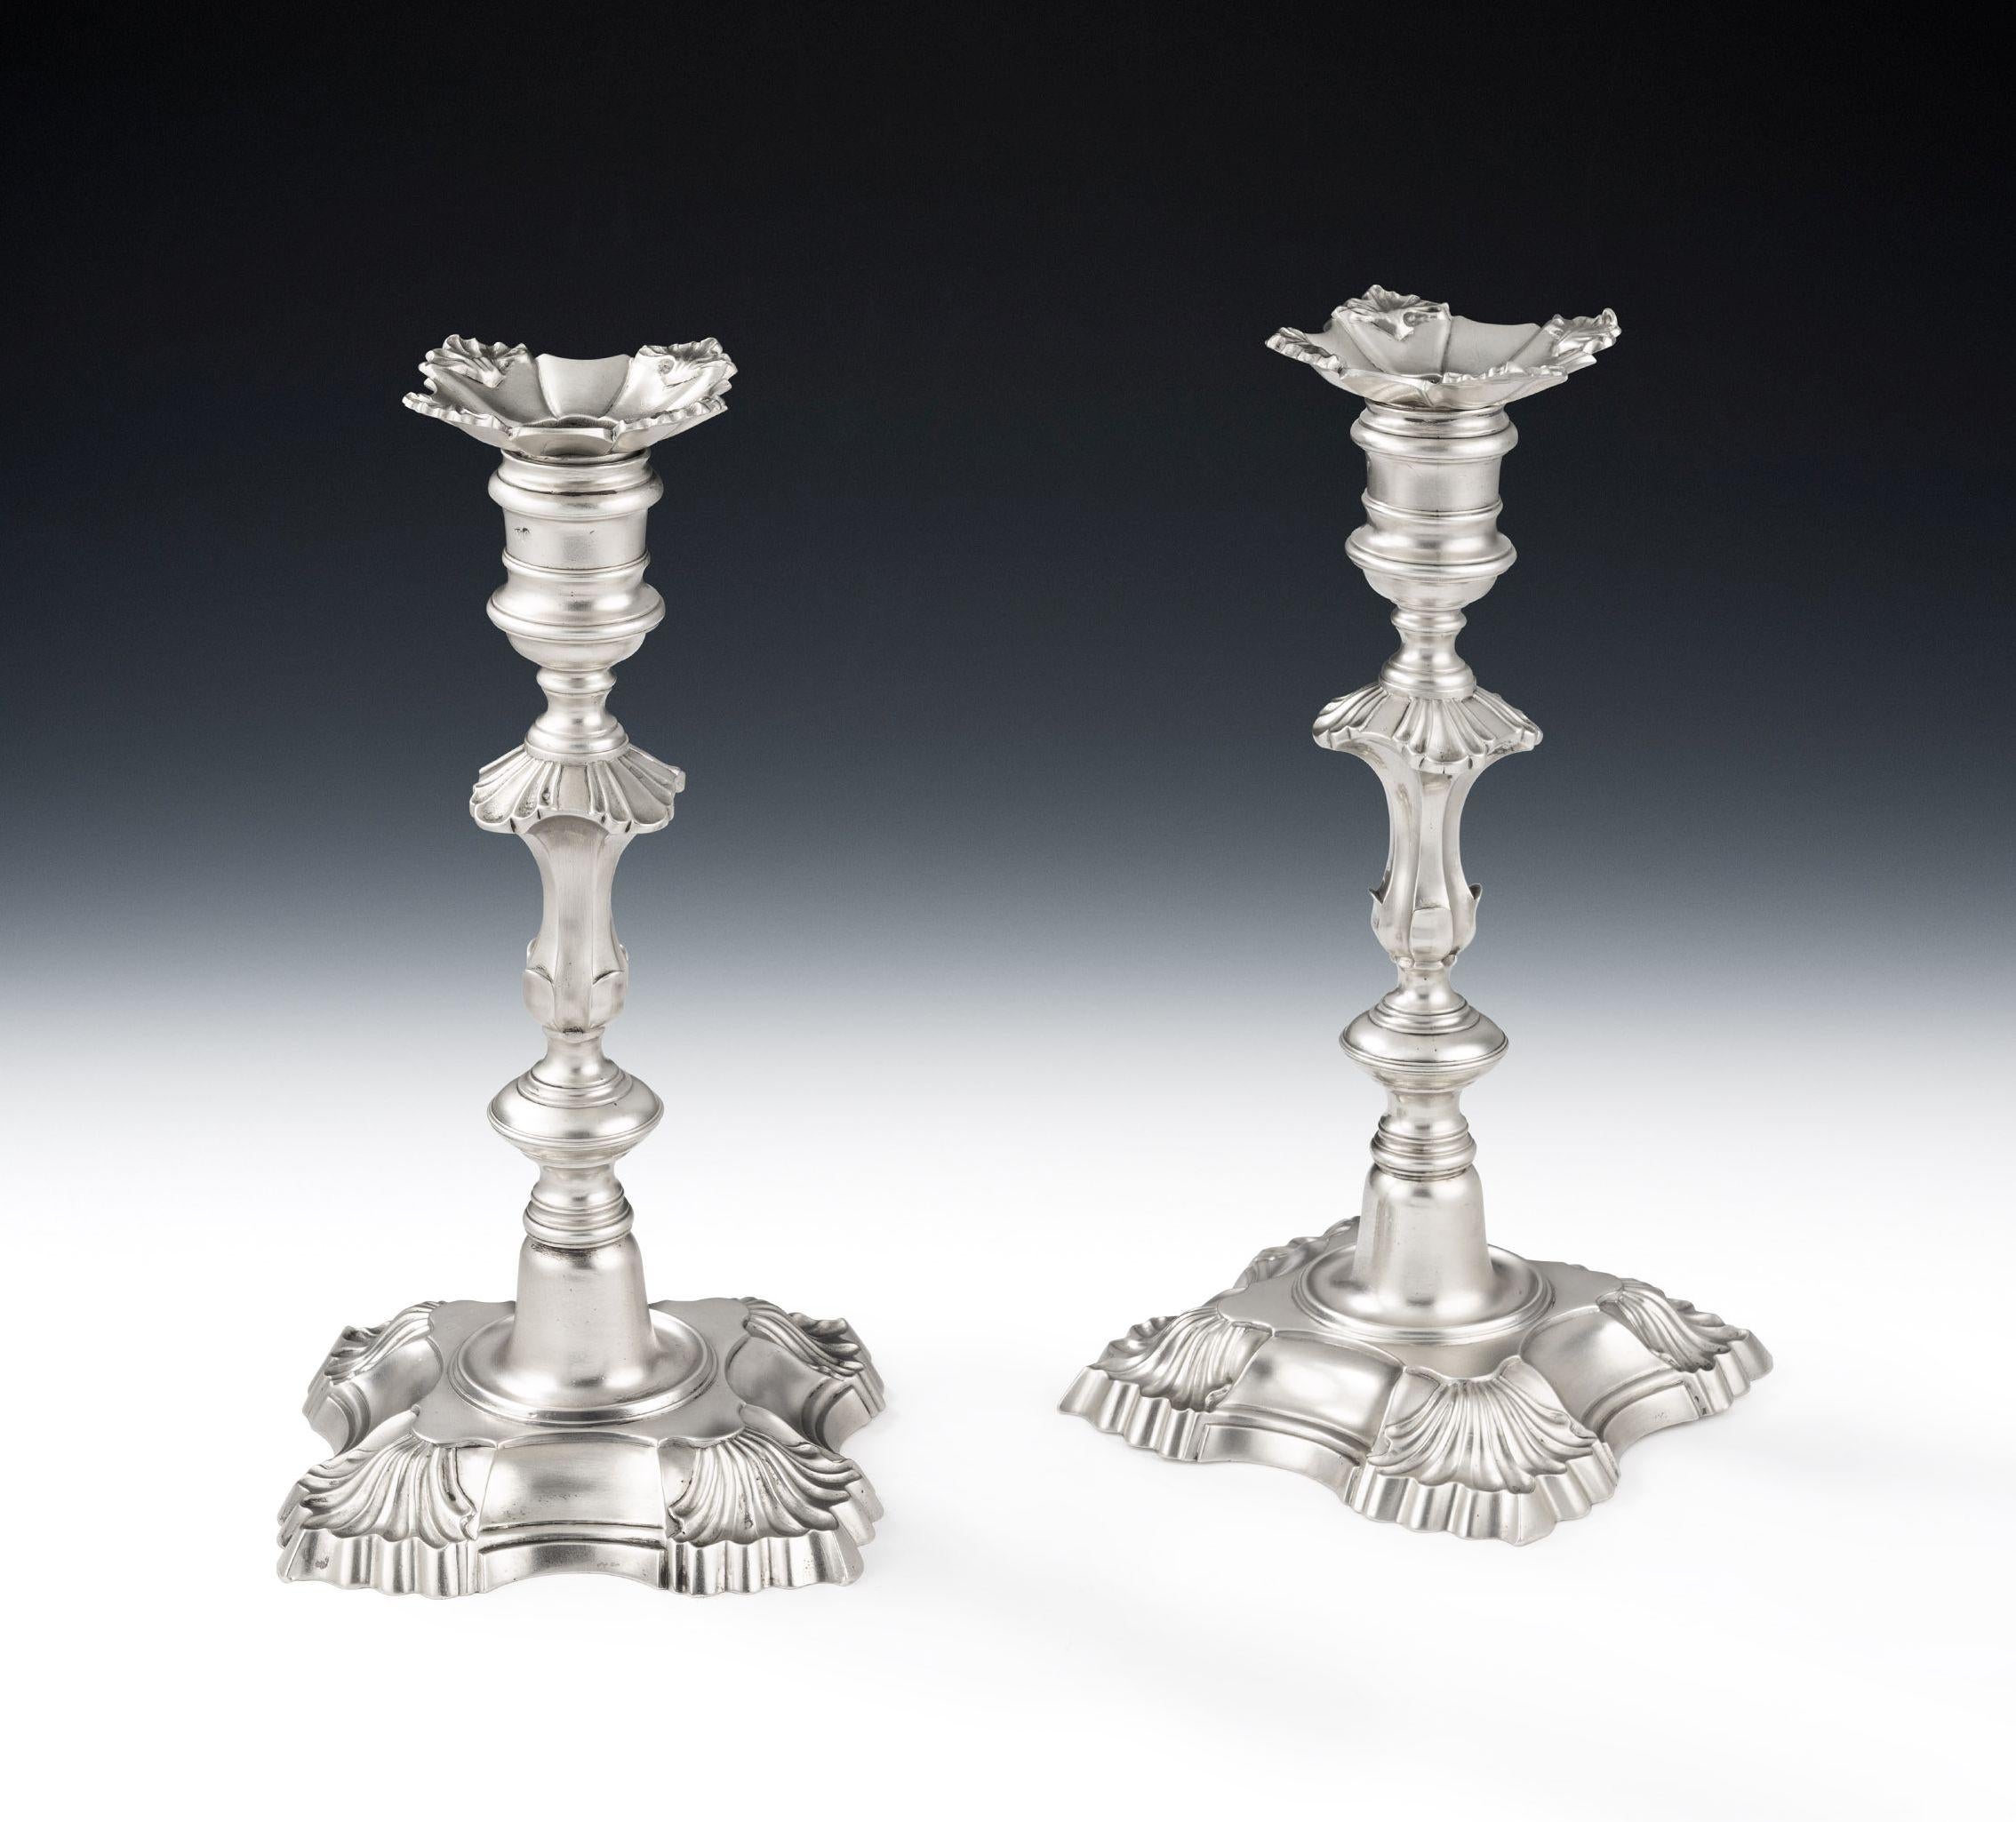 A VERY FINE & SUBSTANTIAL PAIR OF GEORGE II CAST CANDLESTICKS MADE IN LONDON IN 1748 BY WILLIAM GOULD.

The Candlesticks are cast and modelled in a much larger version of this style than is usually seen at this date. Each stands on a shaped foot